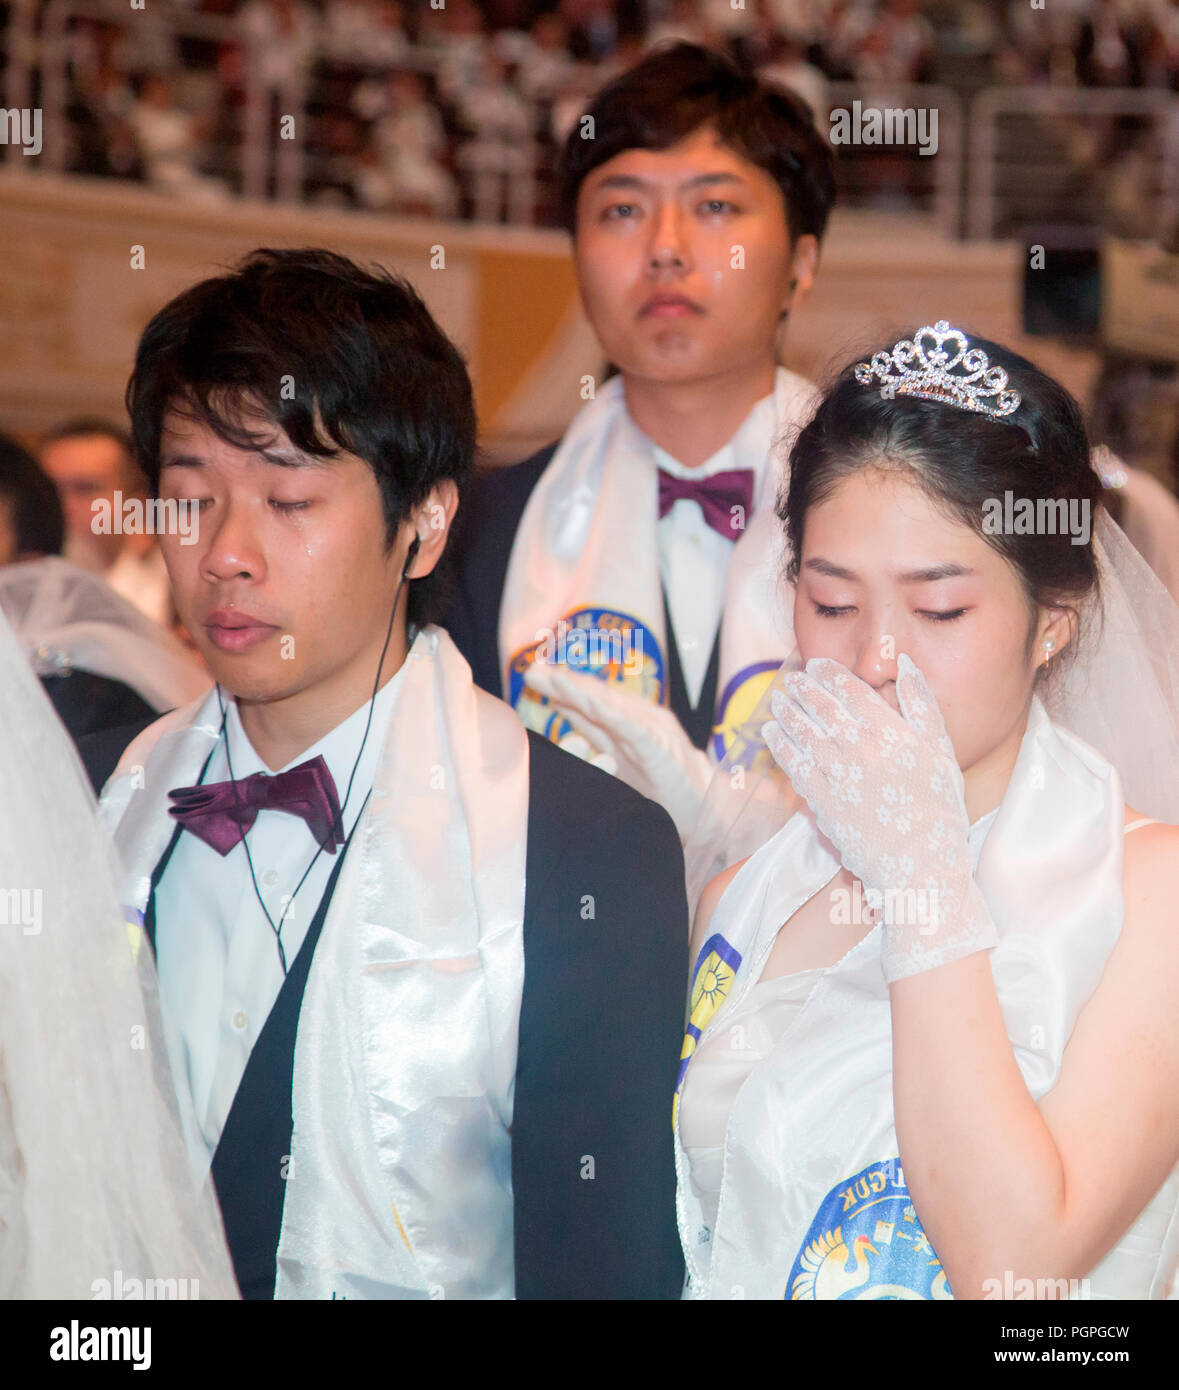 Seoul, South Korea. 27th Aug 2018. Mass wedding ceremony of the Unification Church, Aug 27, 2018 : Couples from Japan pray during a mass wedding ceremony of the Unification Church at the CheongShim Peace World Center in Gapyeong, about 60 km (37 miles) northeast of Seoul, South Korea. Four thousand newlywed couples from around the world participated in the mass wedding on Monday, which was organized by Hak Ja Han Moon, wife of the late Reverend Sun Myung Moon. Credit: Aflo Co. Ltd./Alamy Live News Stock Photo